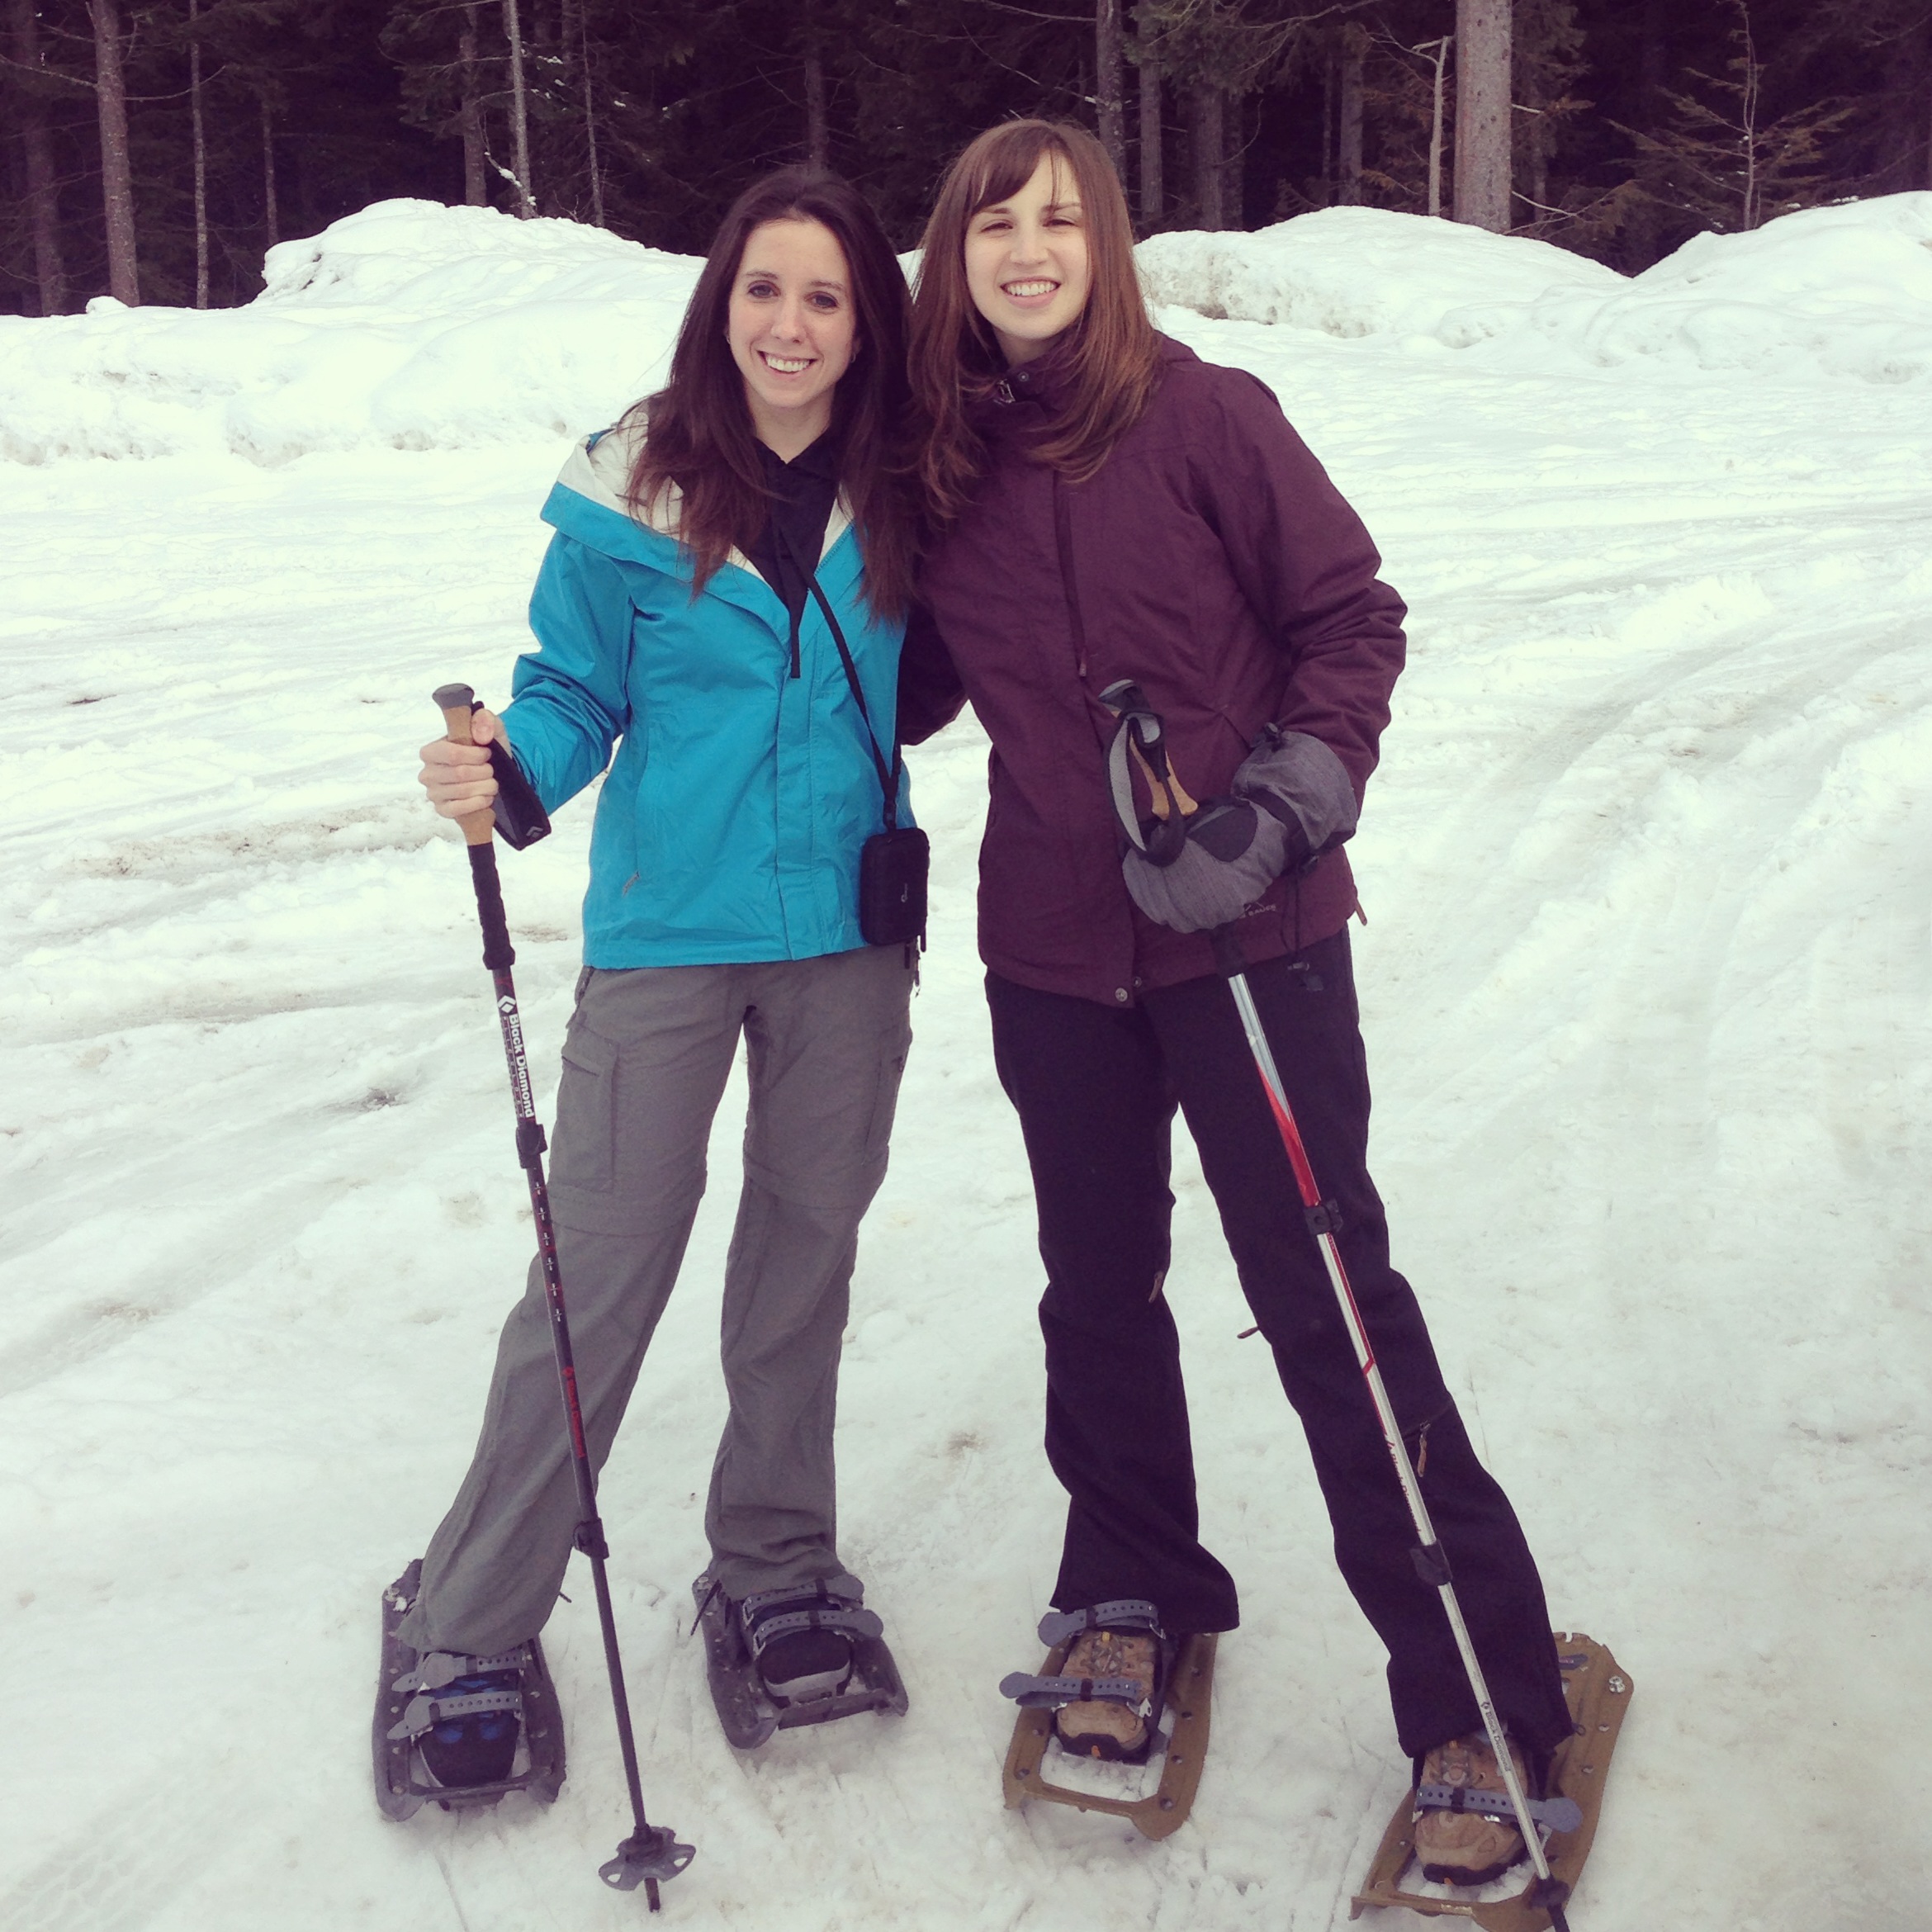 Snowshoeing can be a fun change of pace during the winter months